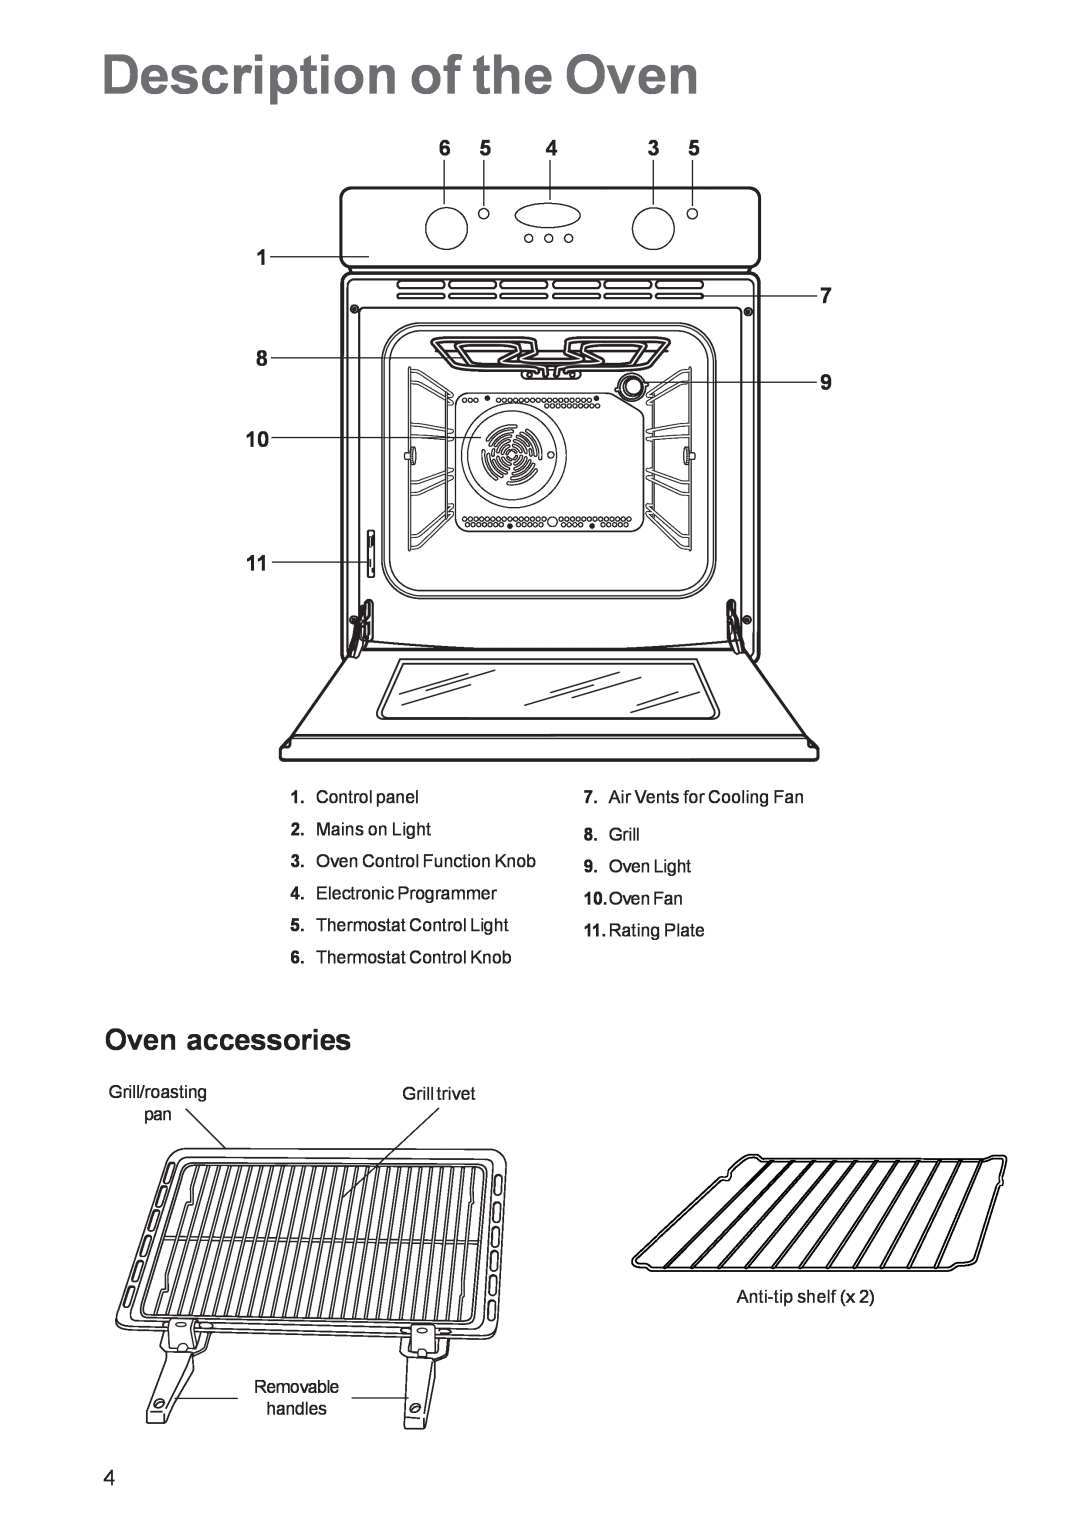 Zanussi ZBS863 Description of the Oven, Oven accessories, Control panel, Mains on Light, Grill, Oven Control Function Knob 